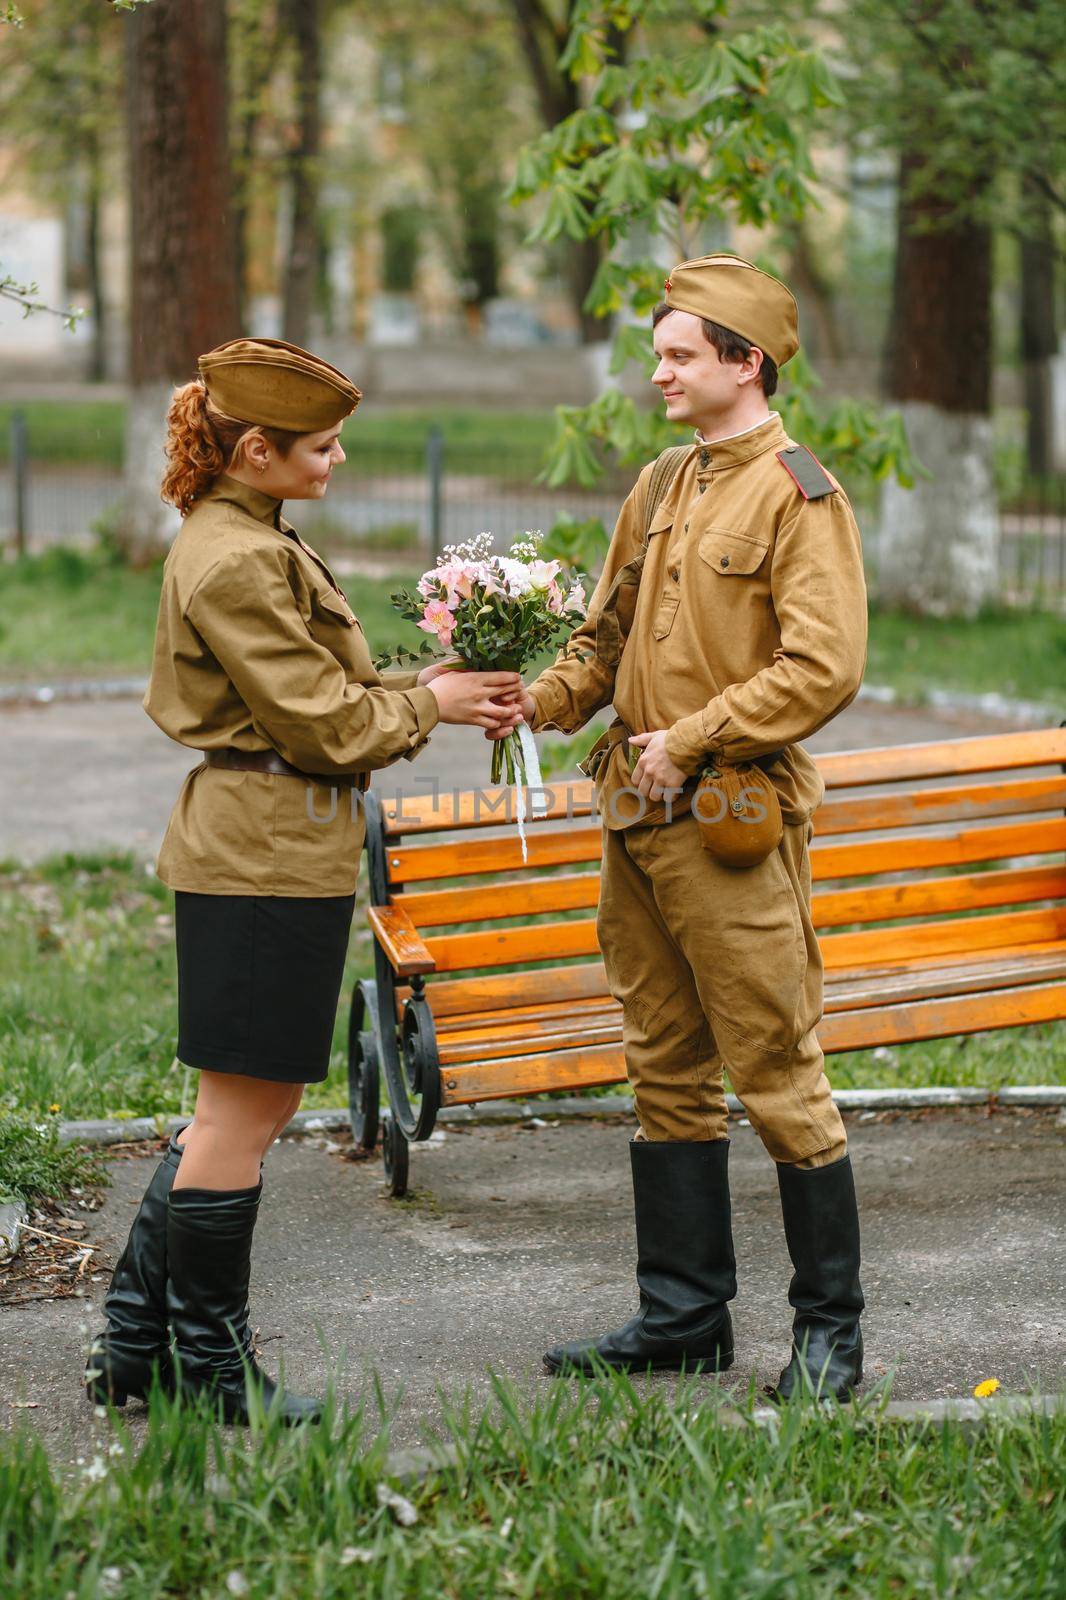 A military girl and a soldier in a Soviet military uniform. Military gives a girl a bouquet